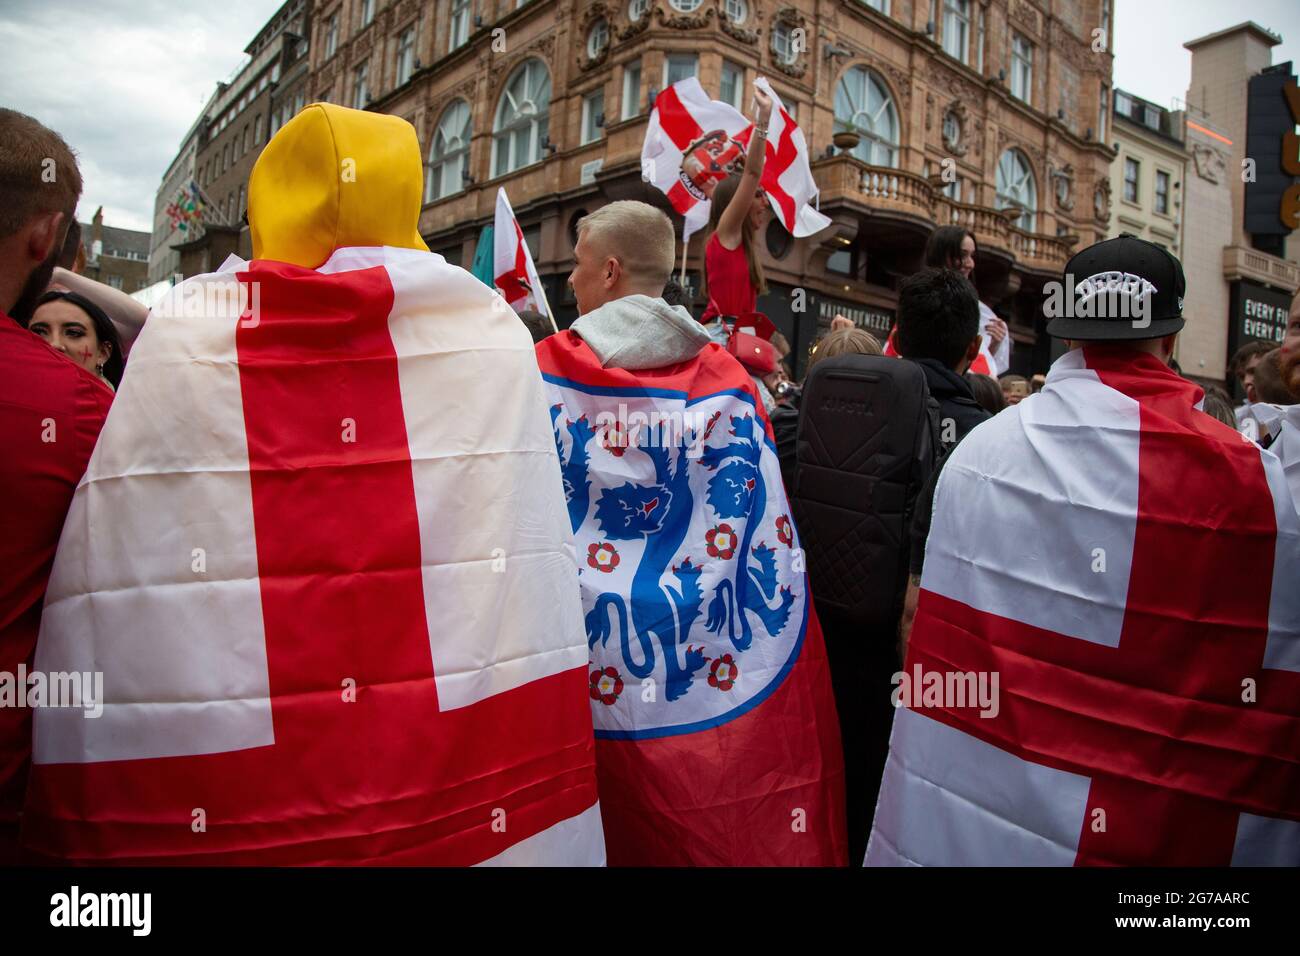 England fans congregate on Leicester Square ahead of the Euro 2020 Final England vs. Italy. Stock Photo